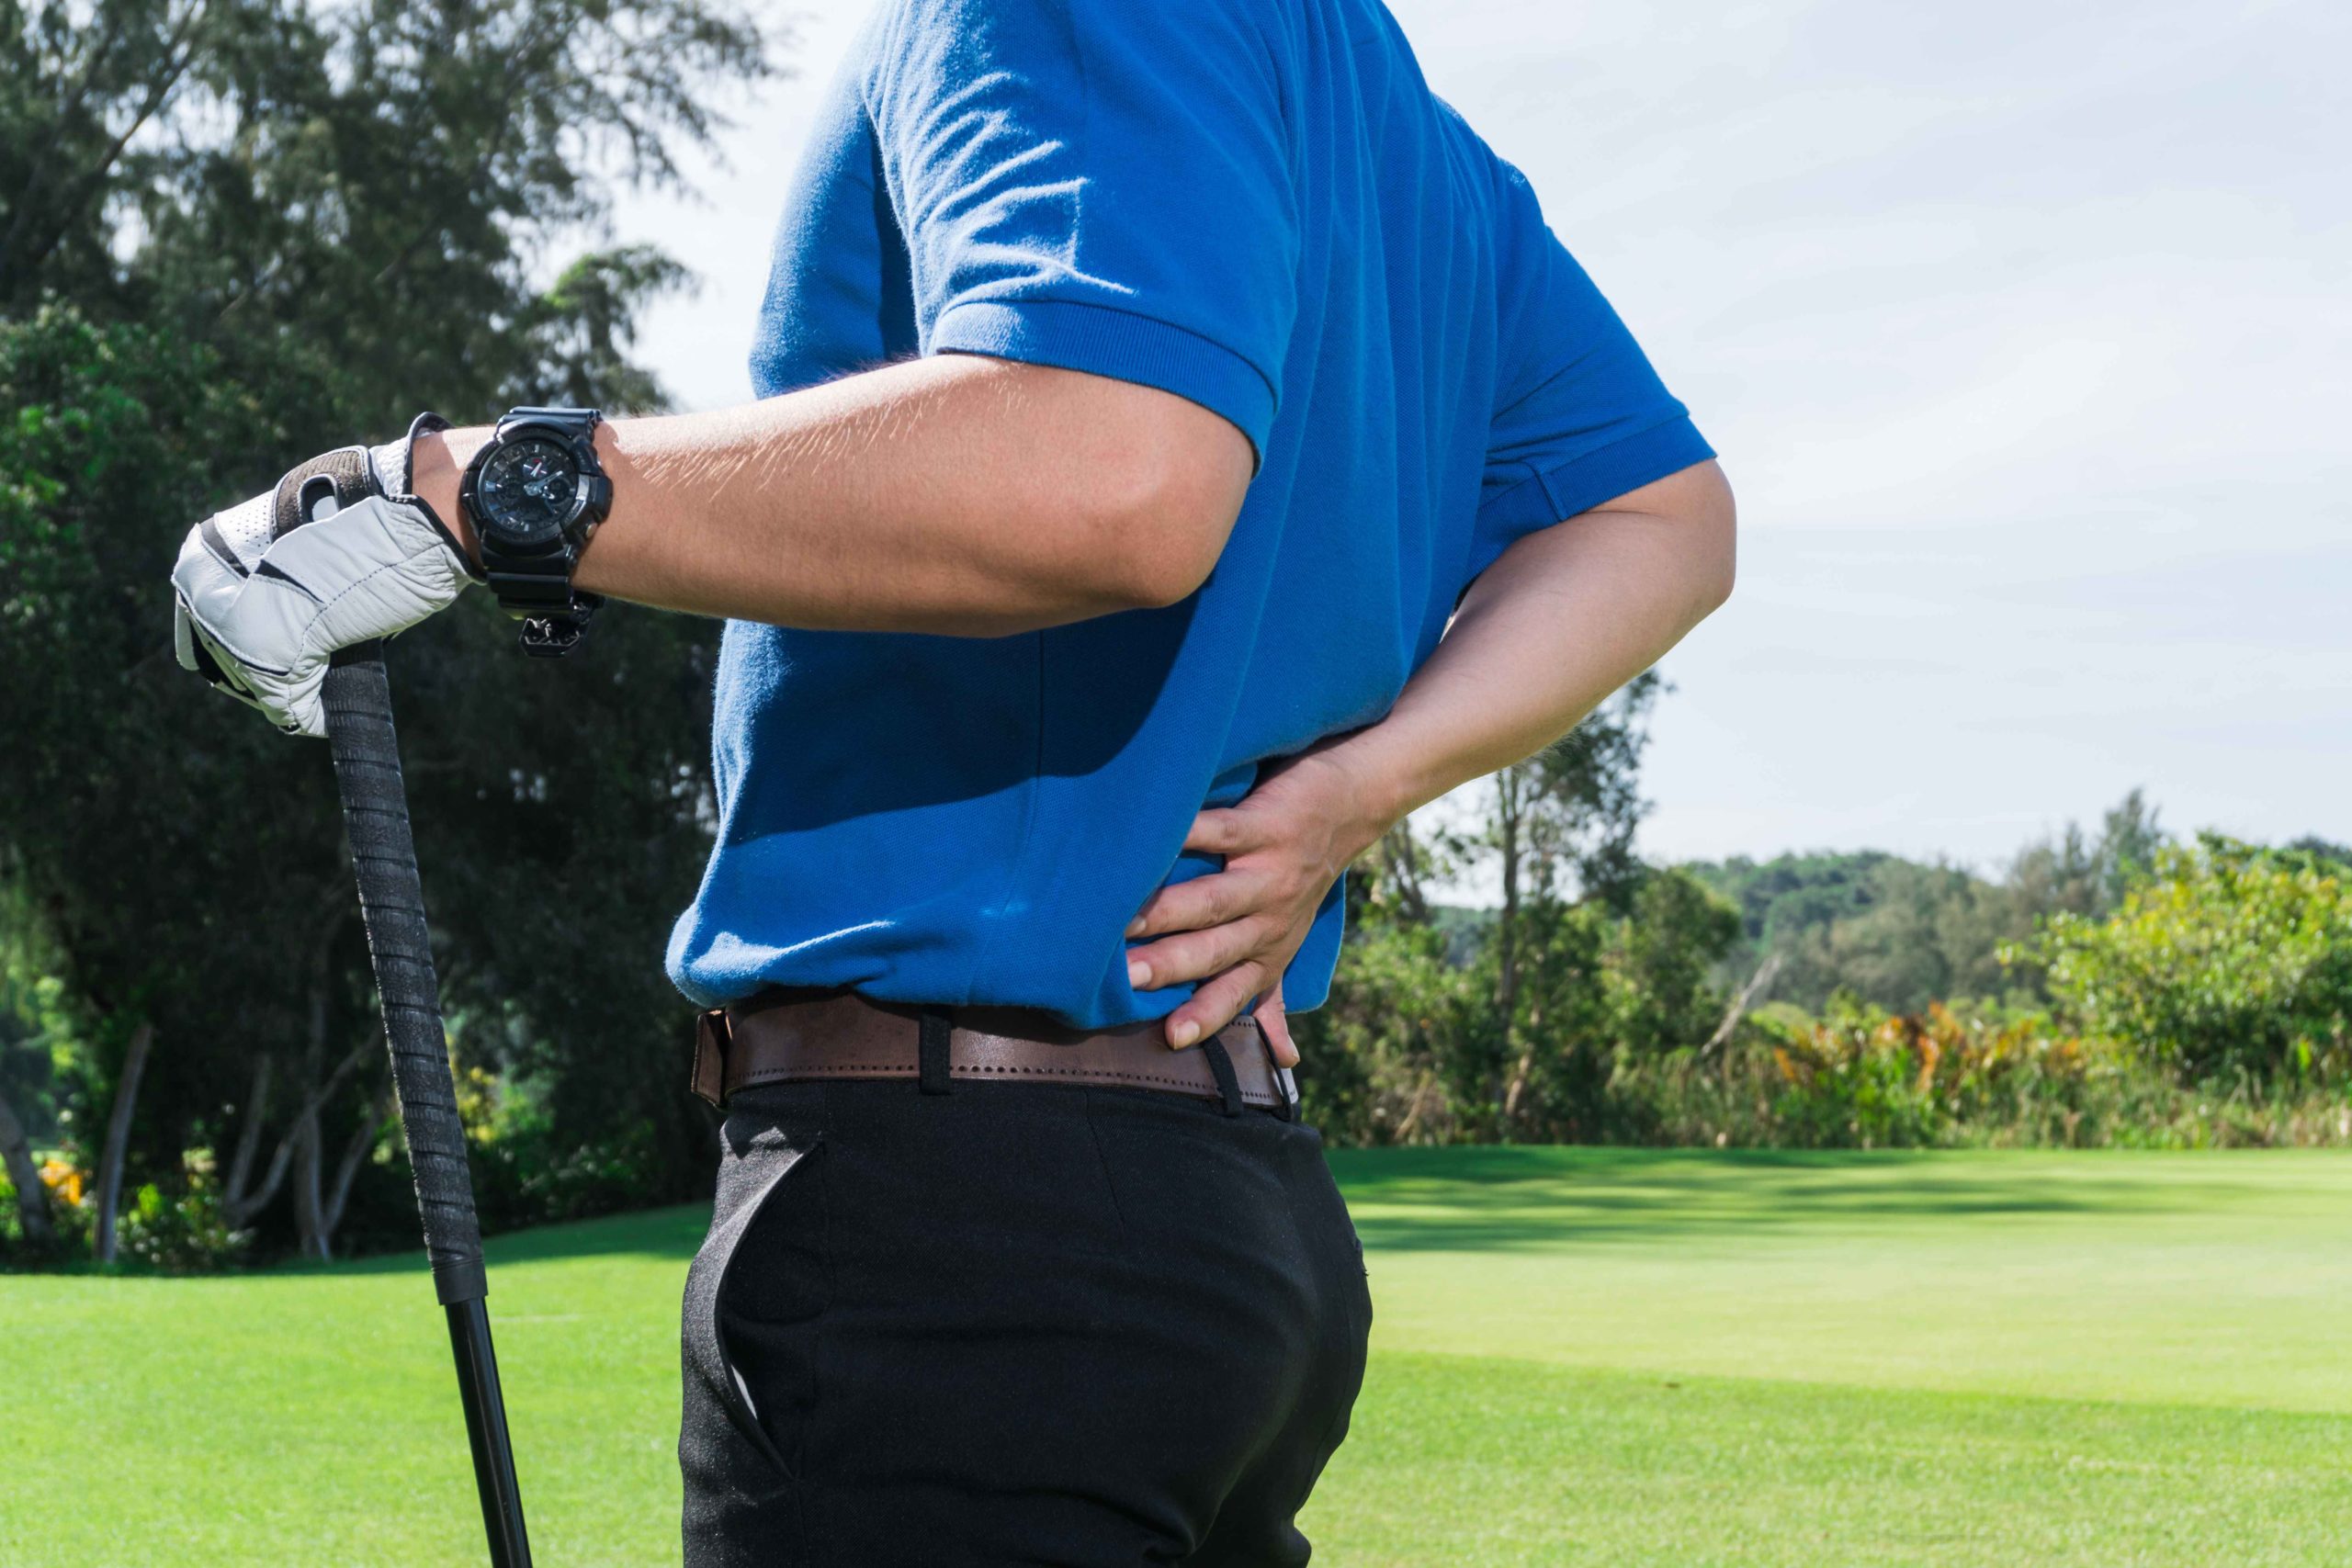 Back Pain in Golfers: 5 Exercises to Improve Your Flexibility